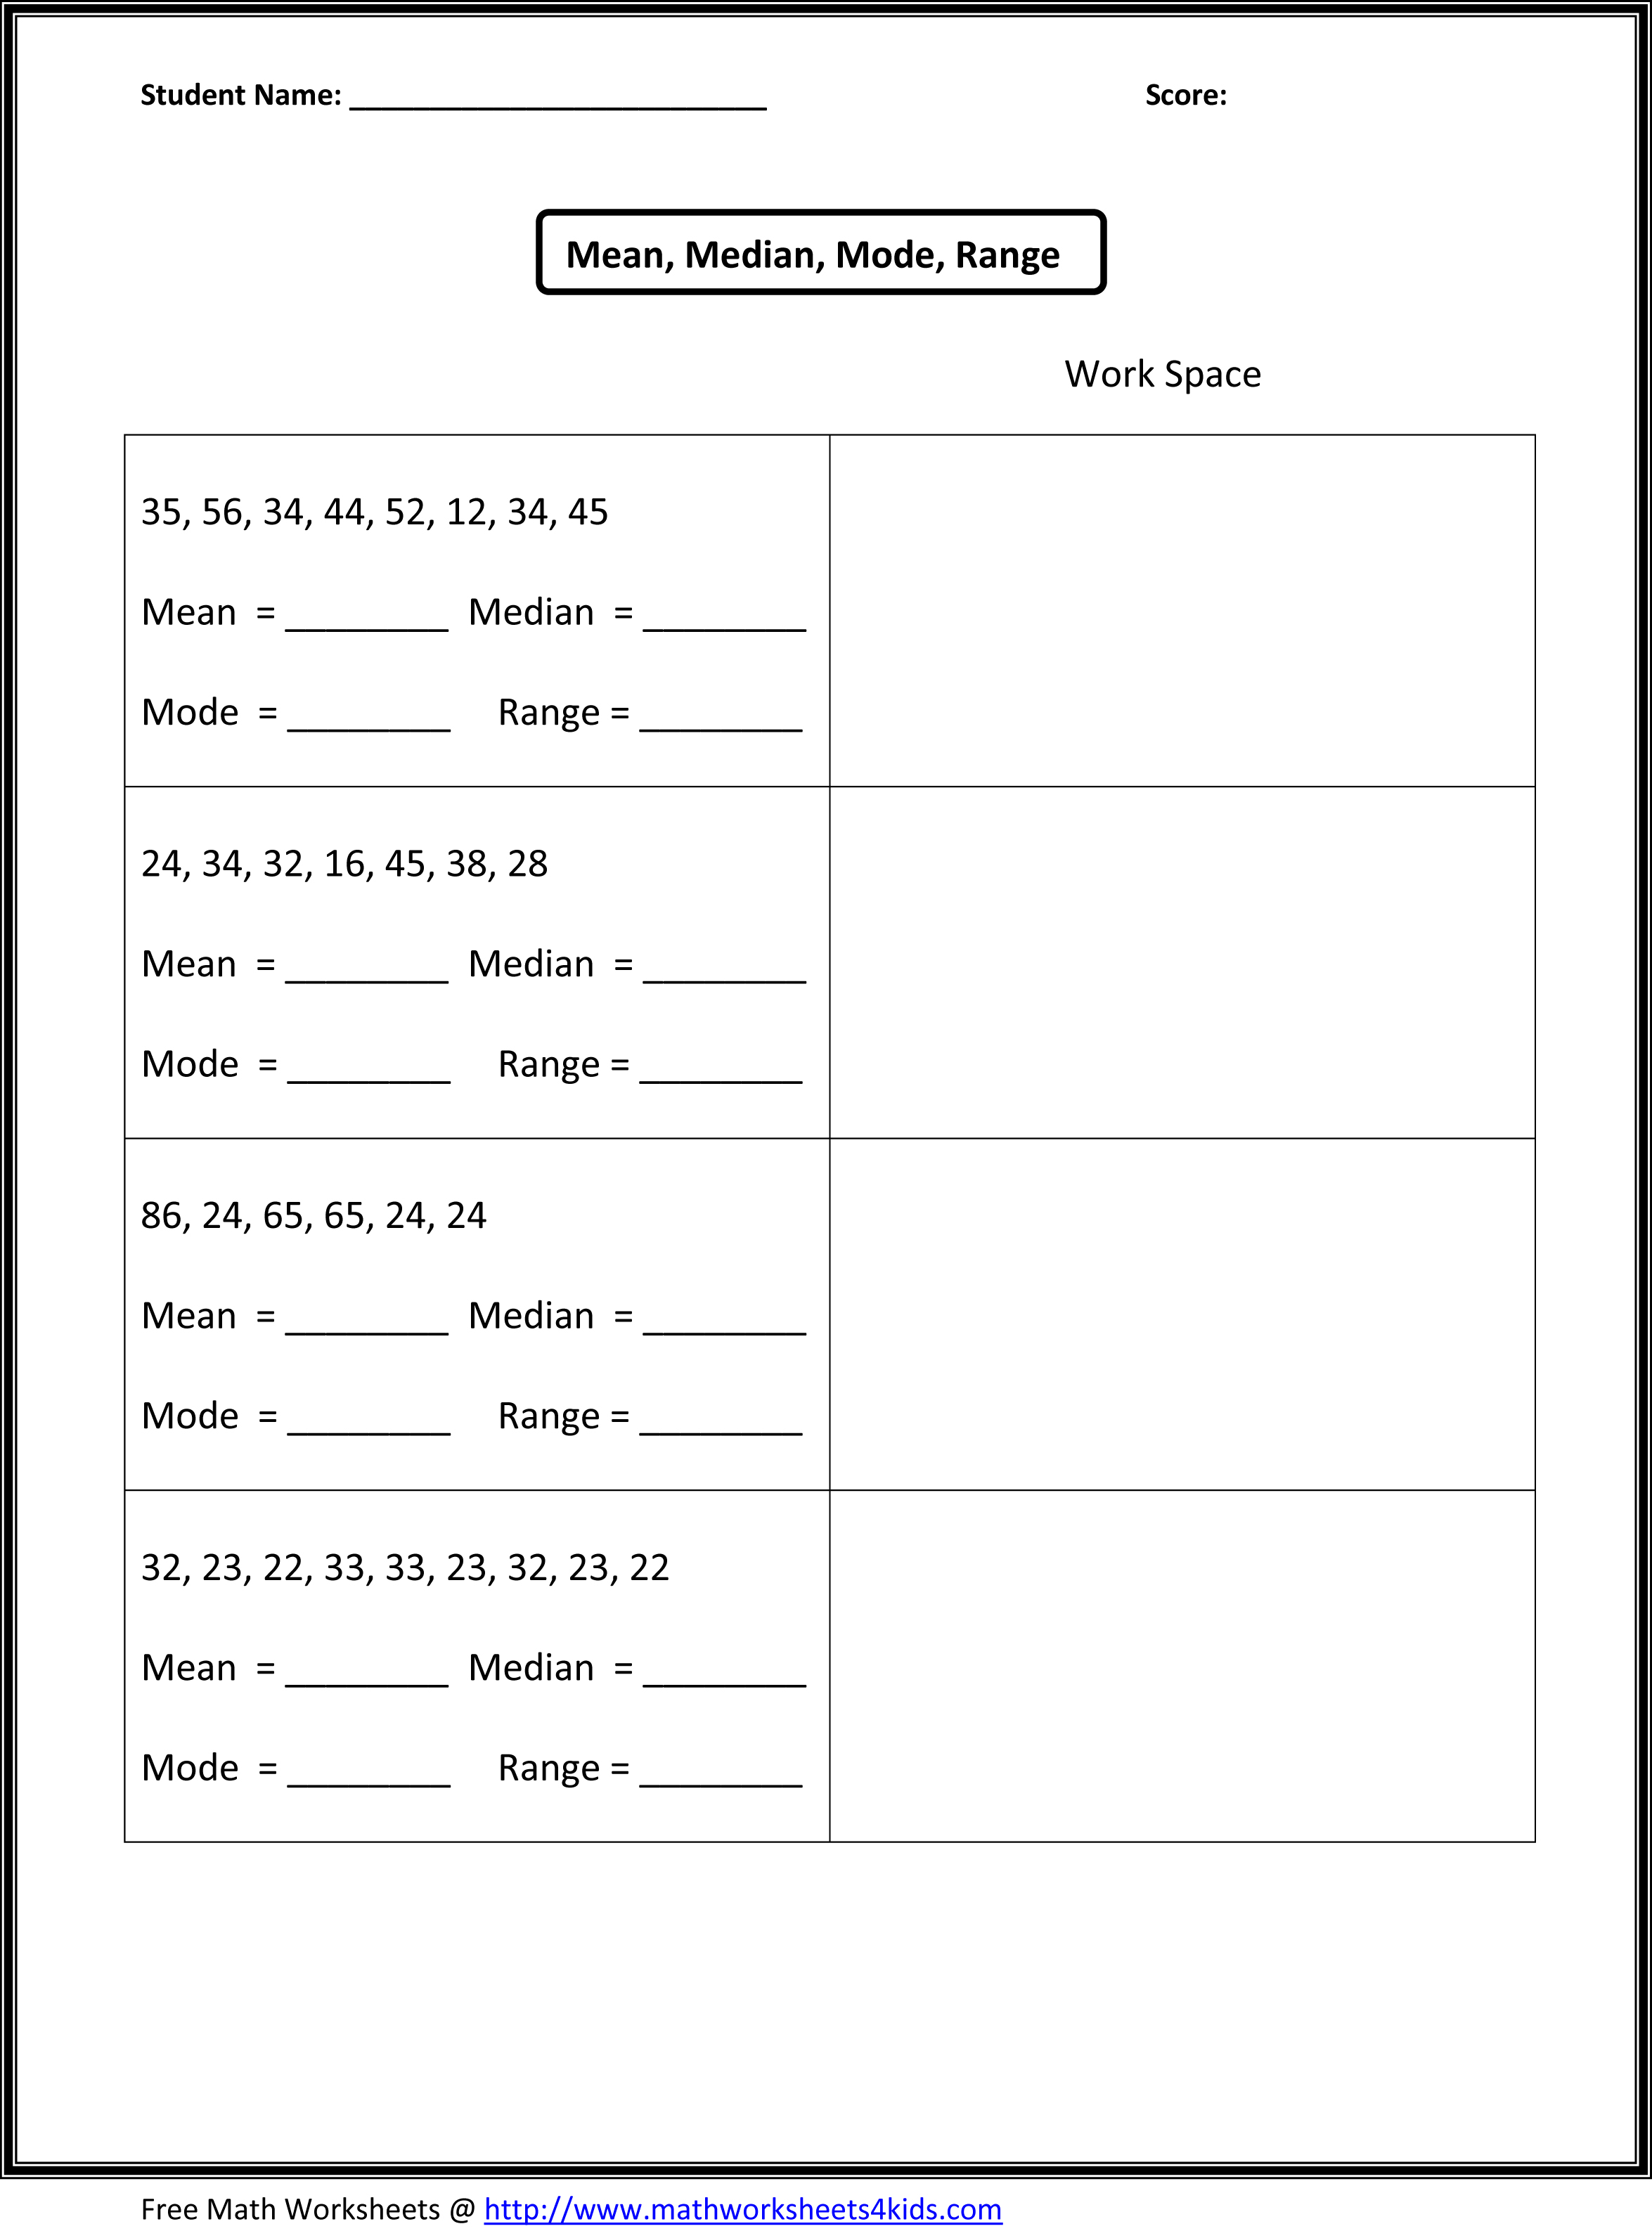 6th Grade Math Worksheets Pdf With Answers